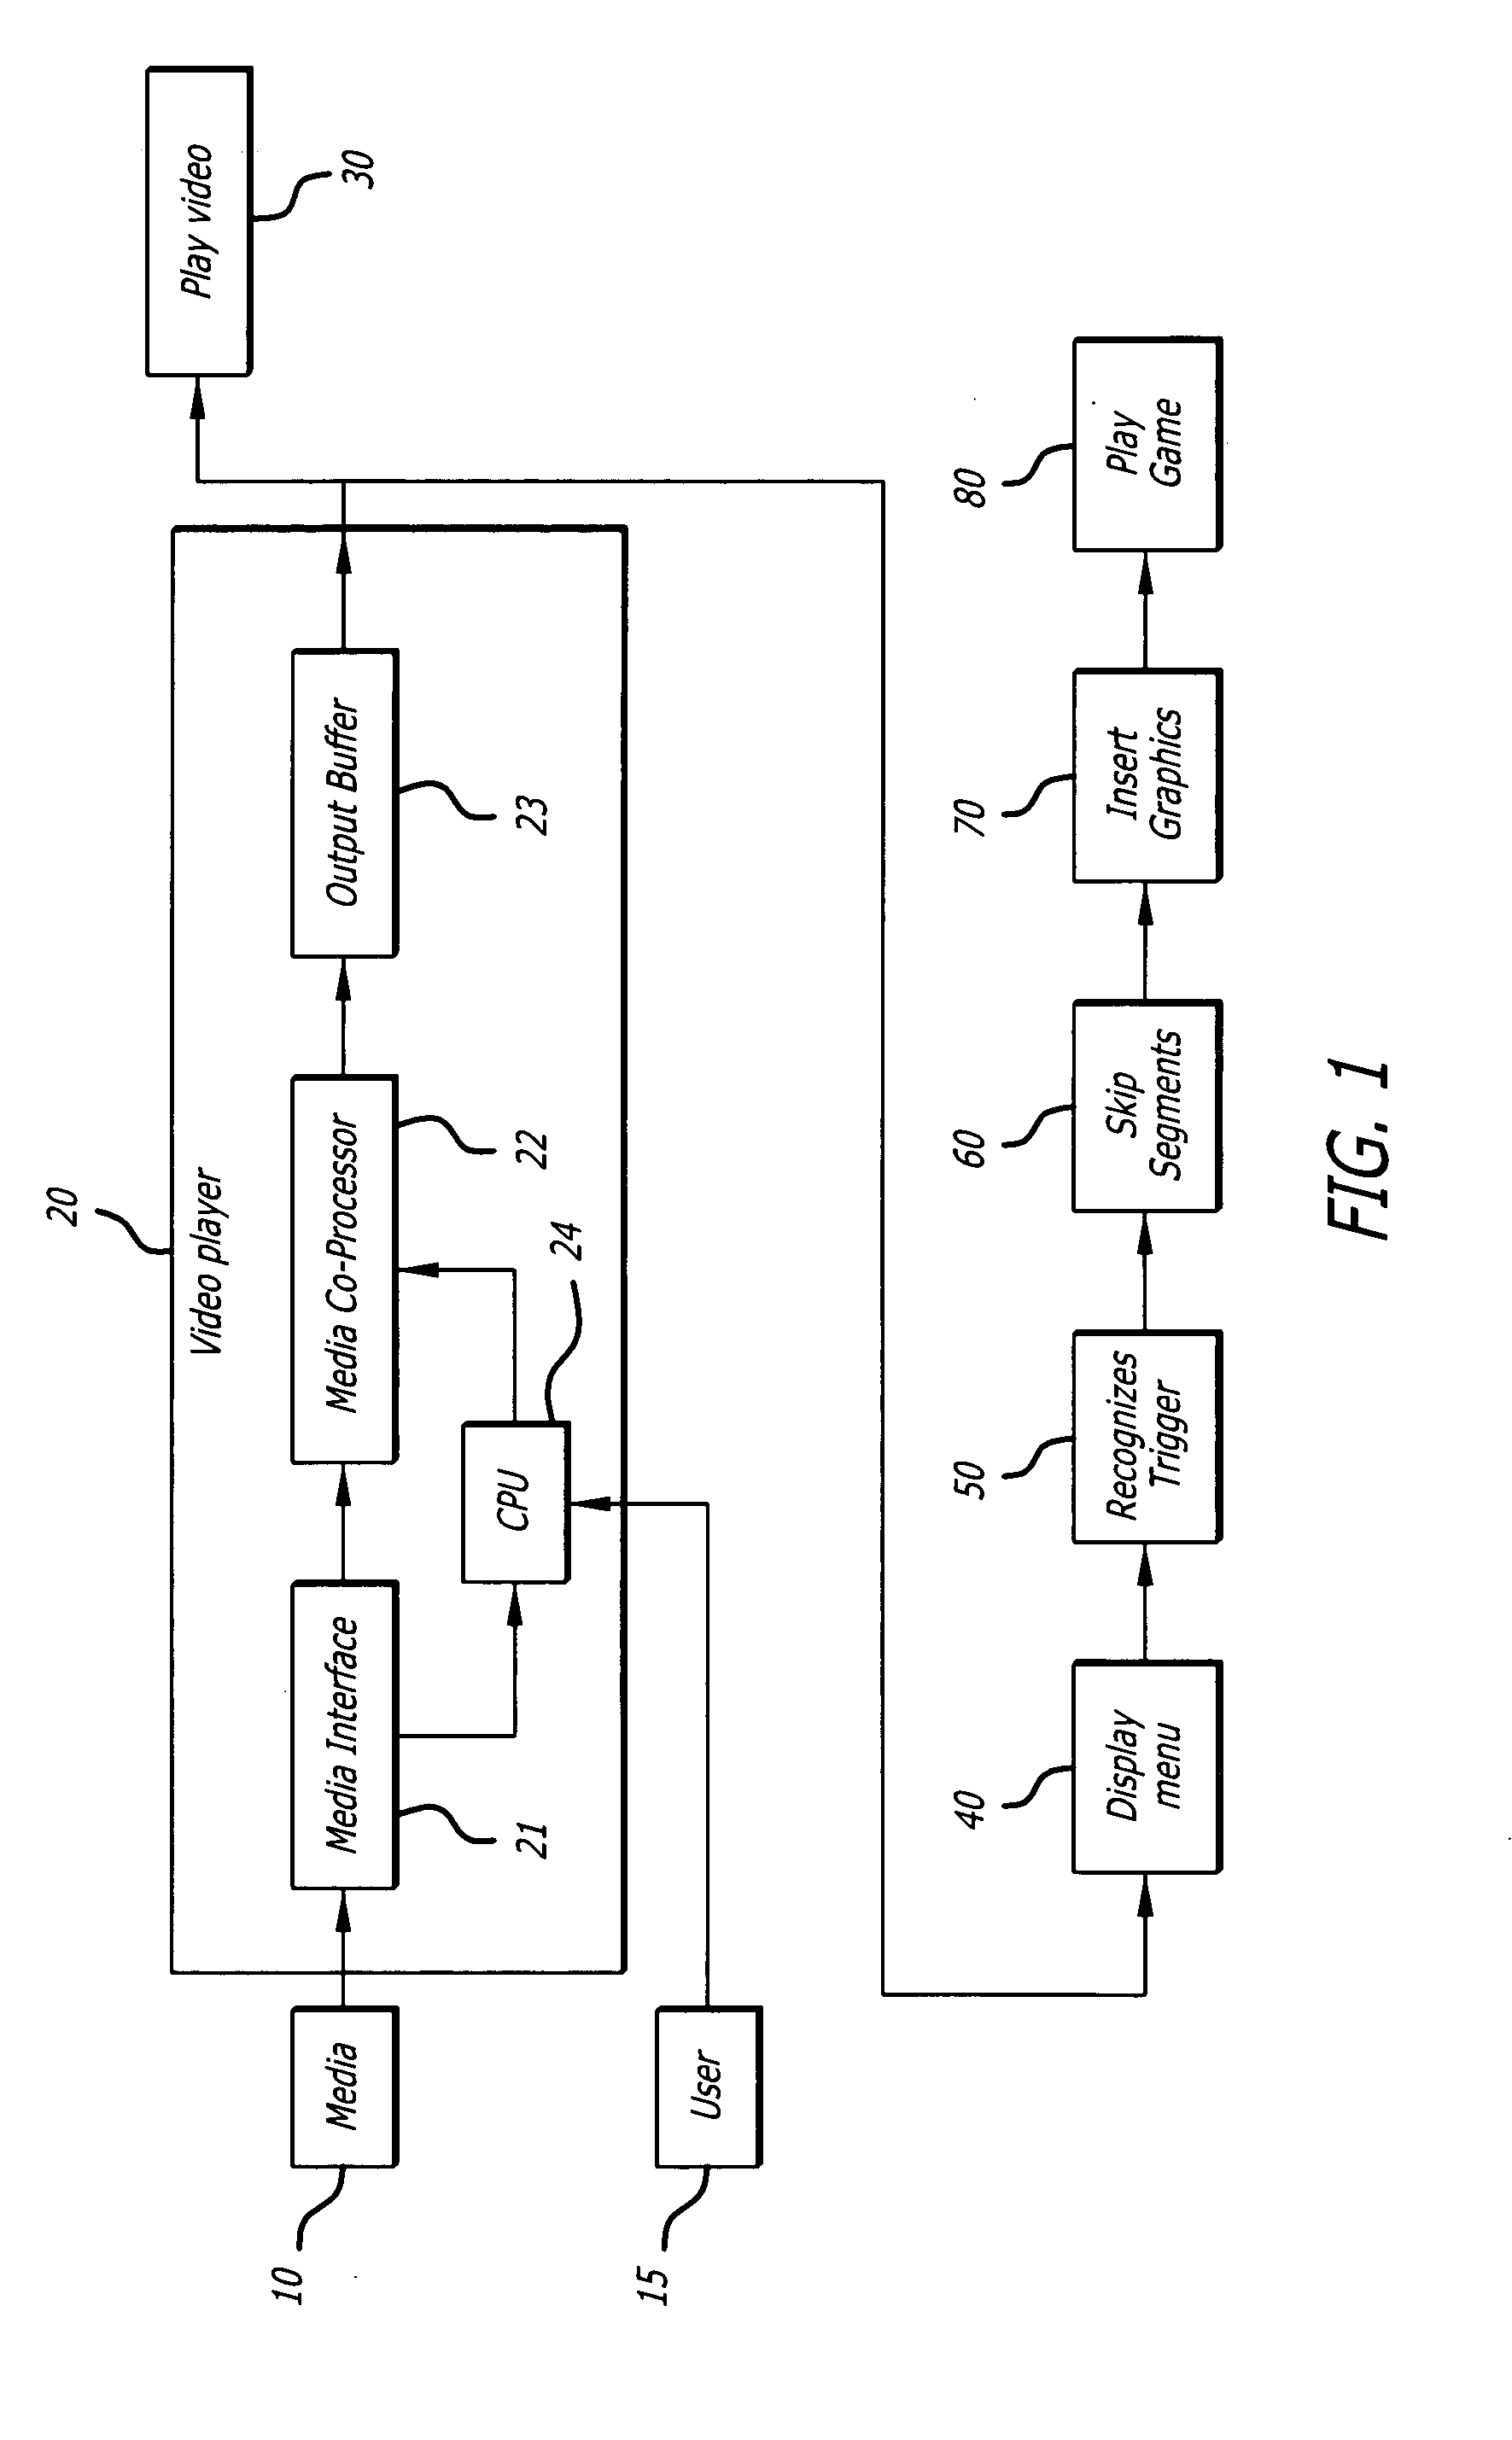 System and method of interactive video playback